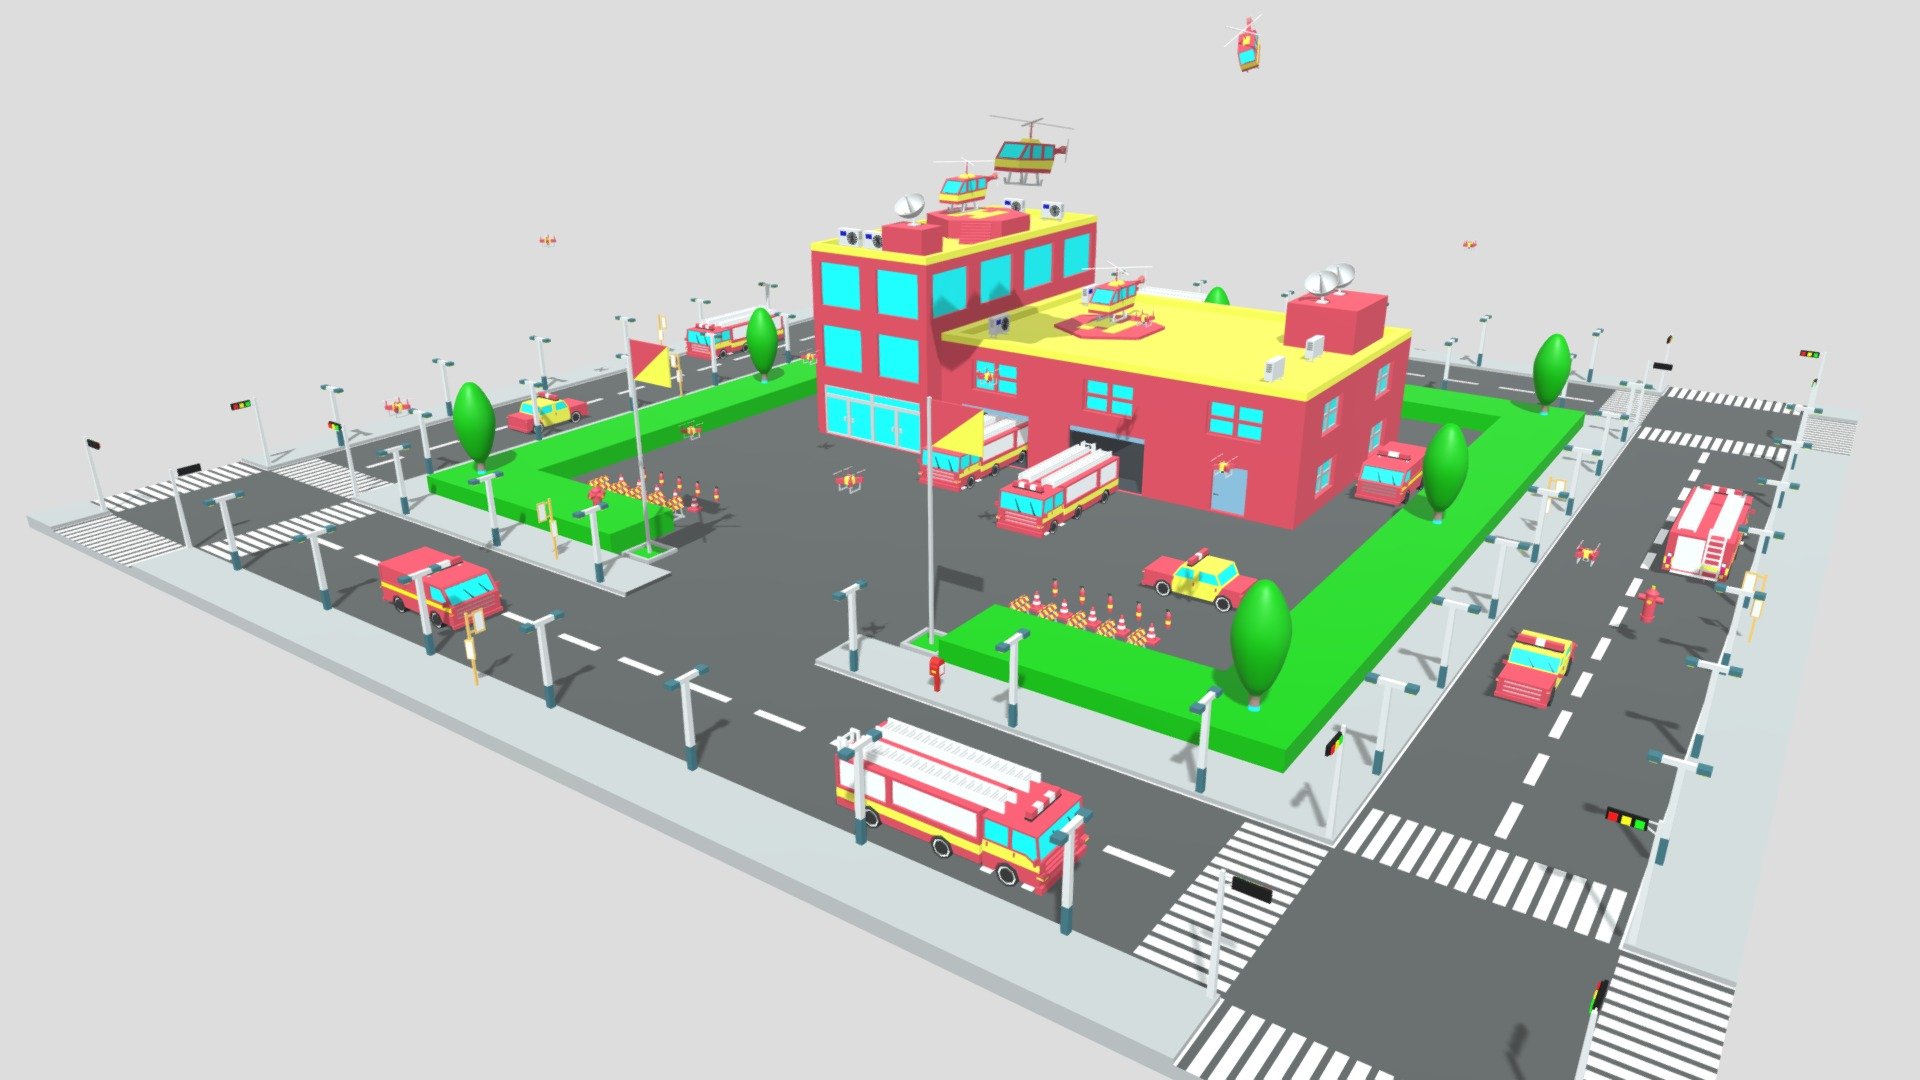 Cartoon City Fire Station

Fire Station
Fire Car
Fire Van
Fire Helicopter
Fire Drone
Traffic Light:
Street Light
Bus Stand
Post Box
Fire Hydrant
Cloud*4:
Satellite Receiver * 3
Fire Extinguisher * 10
Fire Flag * 2
Fire Roadblock * 10
Traffic Cone * 10
Verts: 47,400
Tris: 41,108 .

This product contains 325 objects.

-This product was created in Blender 2.935.

-Formats: blend, fbx, obj, c4d, dae, abc, stl, glb,unity.

-We hope you enjoy this model.

-Thank you 3d model